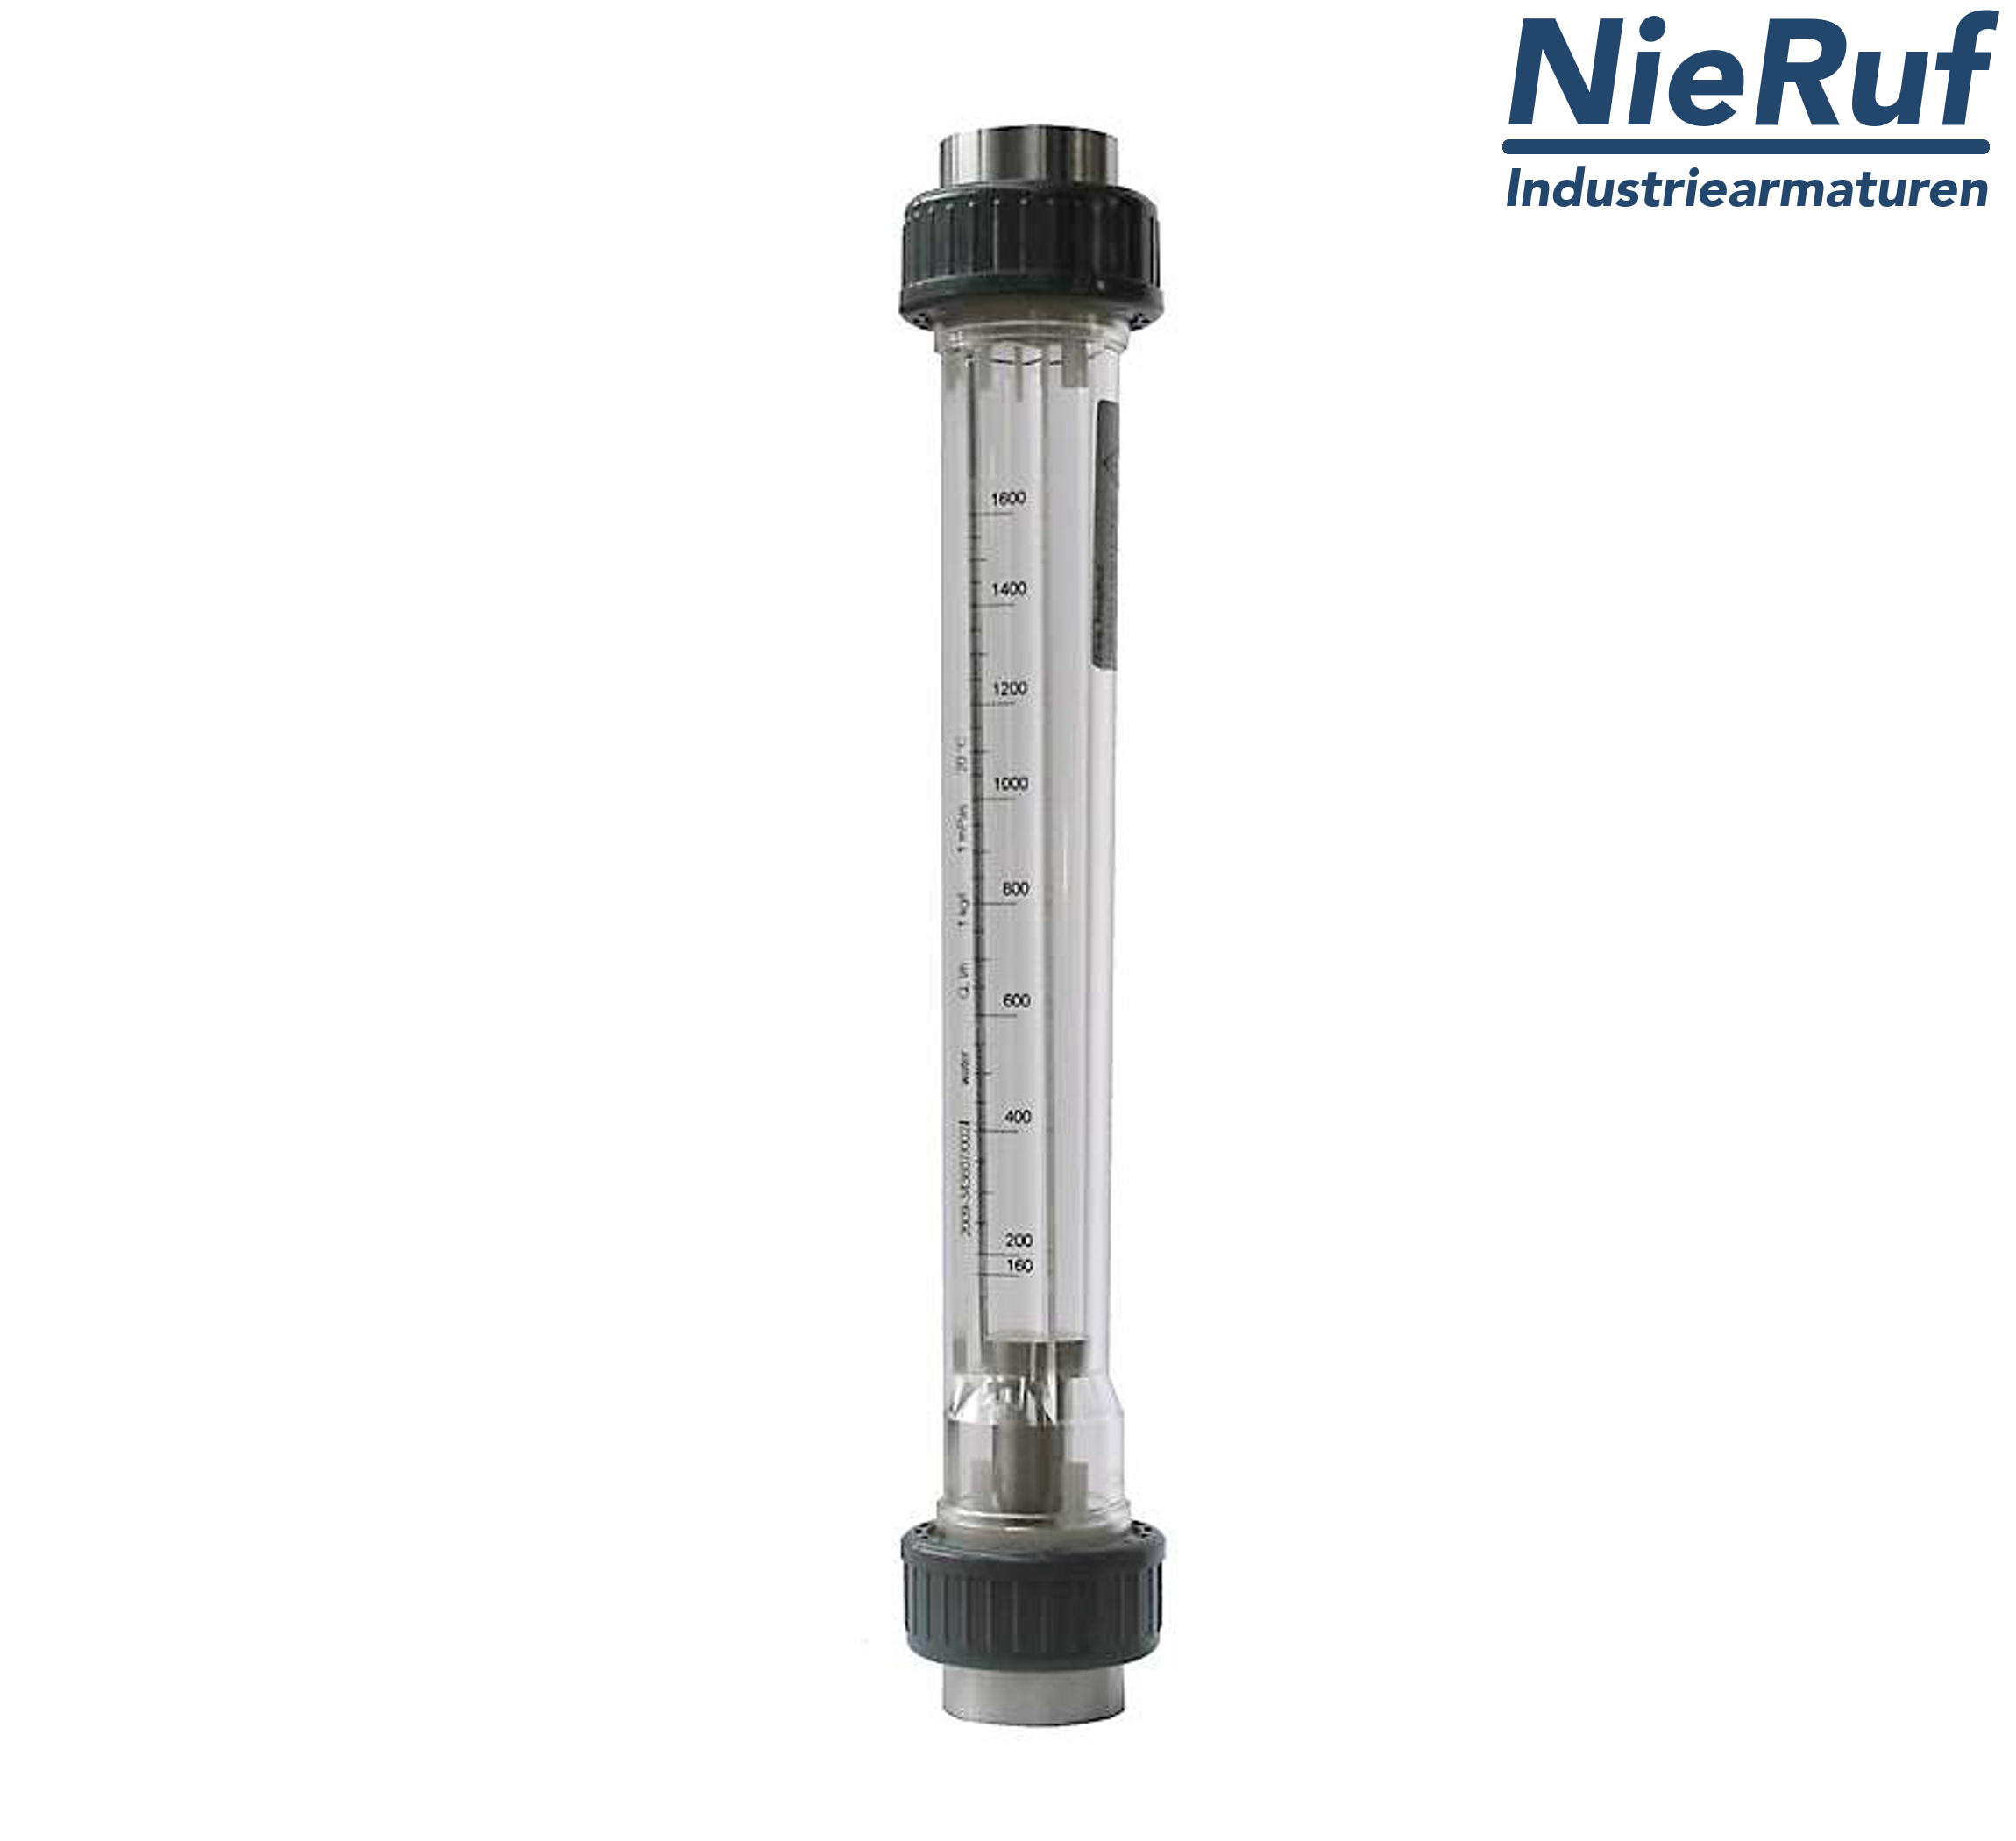 Variable area flowmeter 1 1/2" inch 400.0 - 4000 l/h water FKM